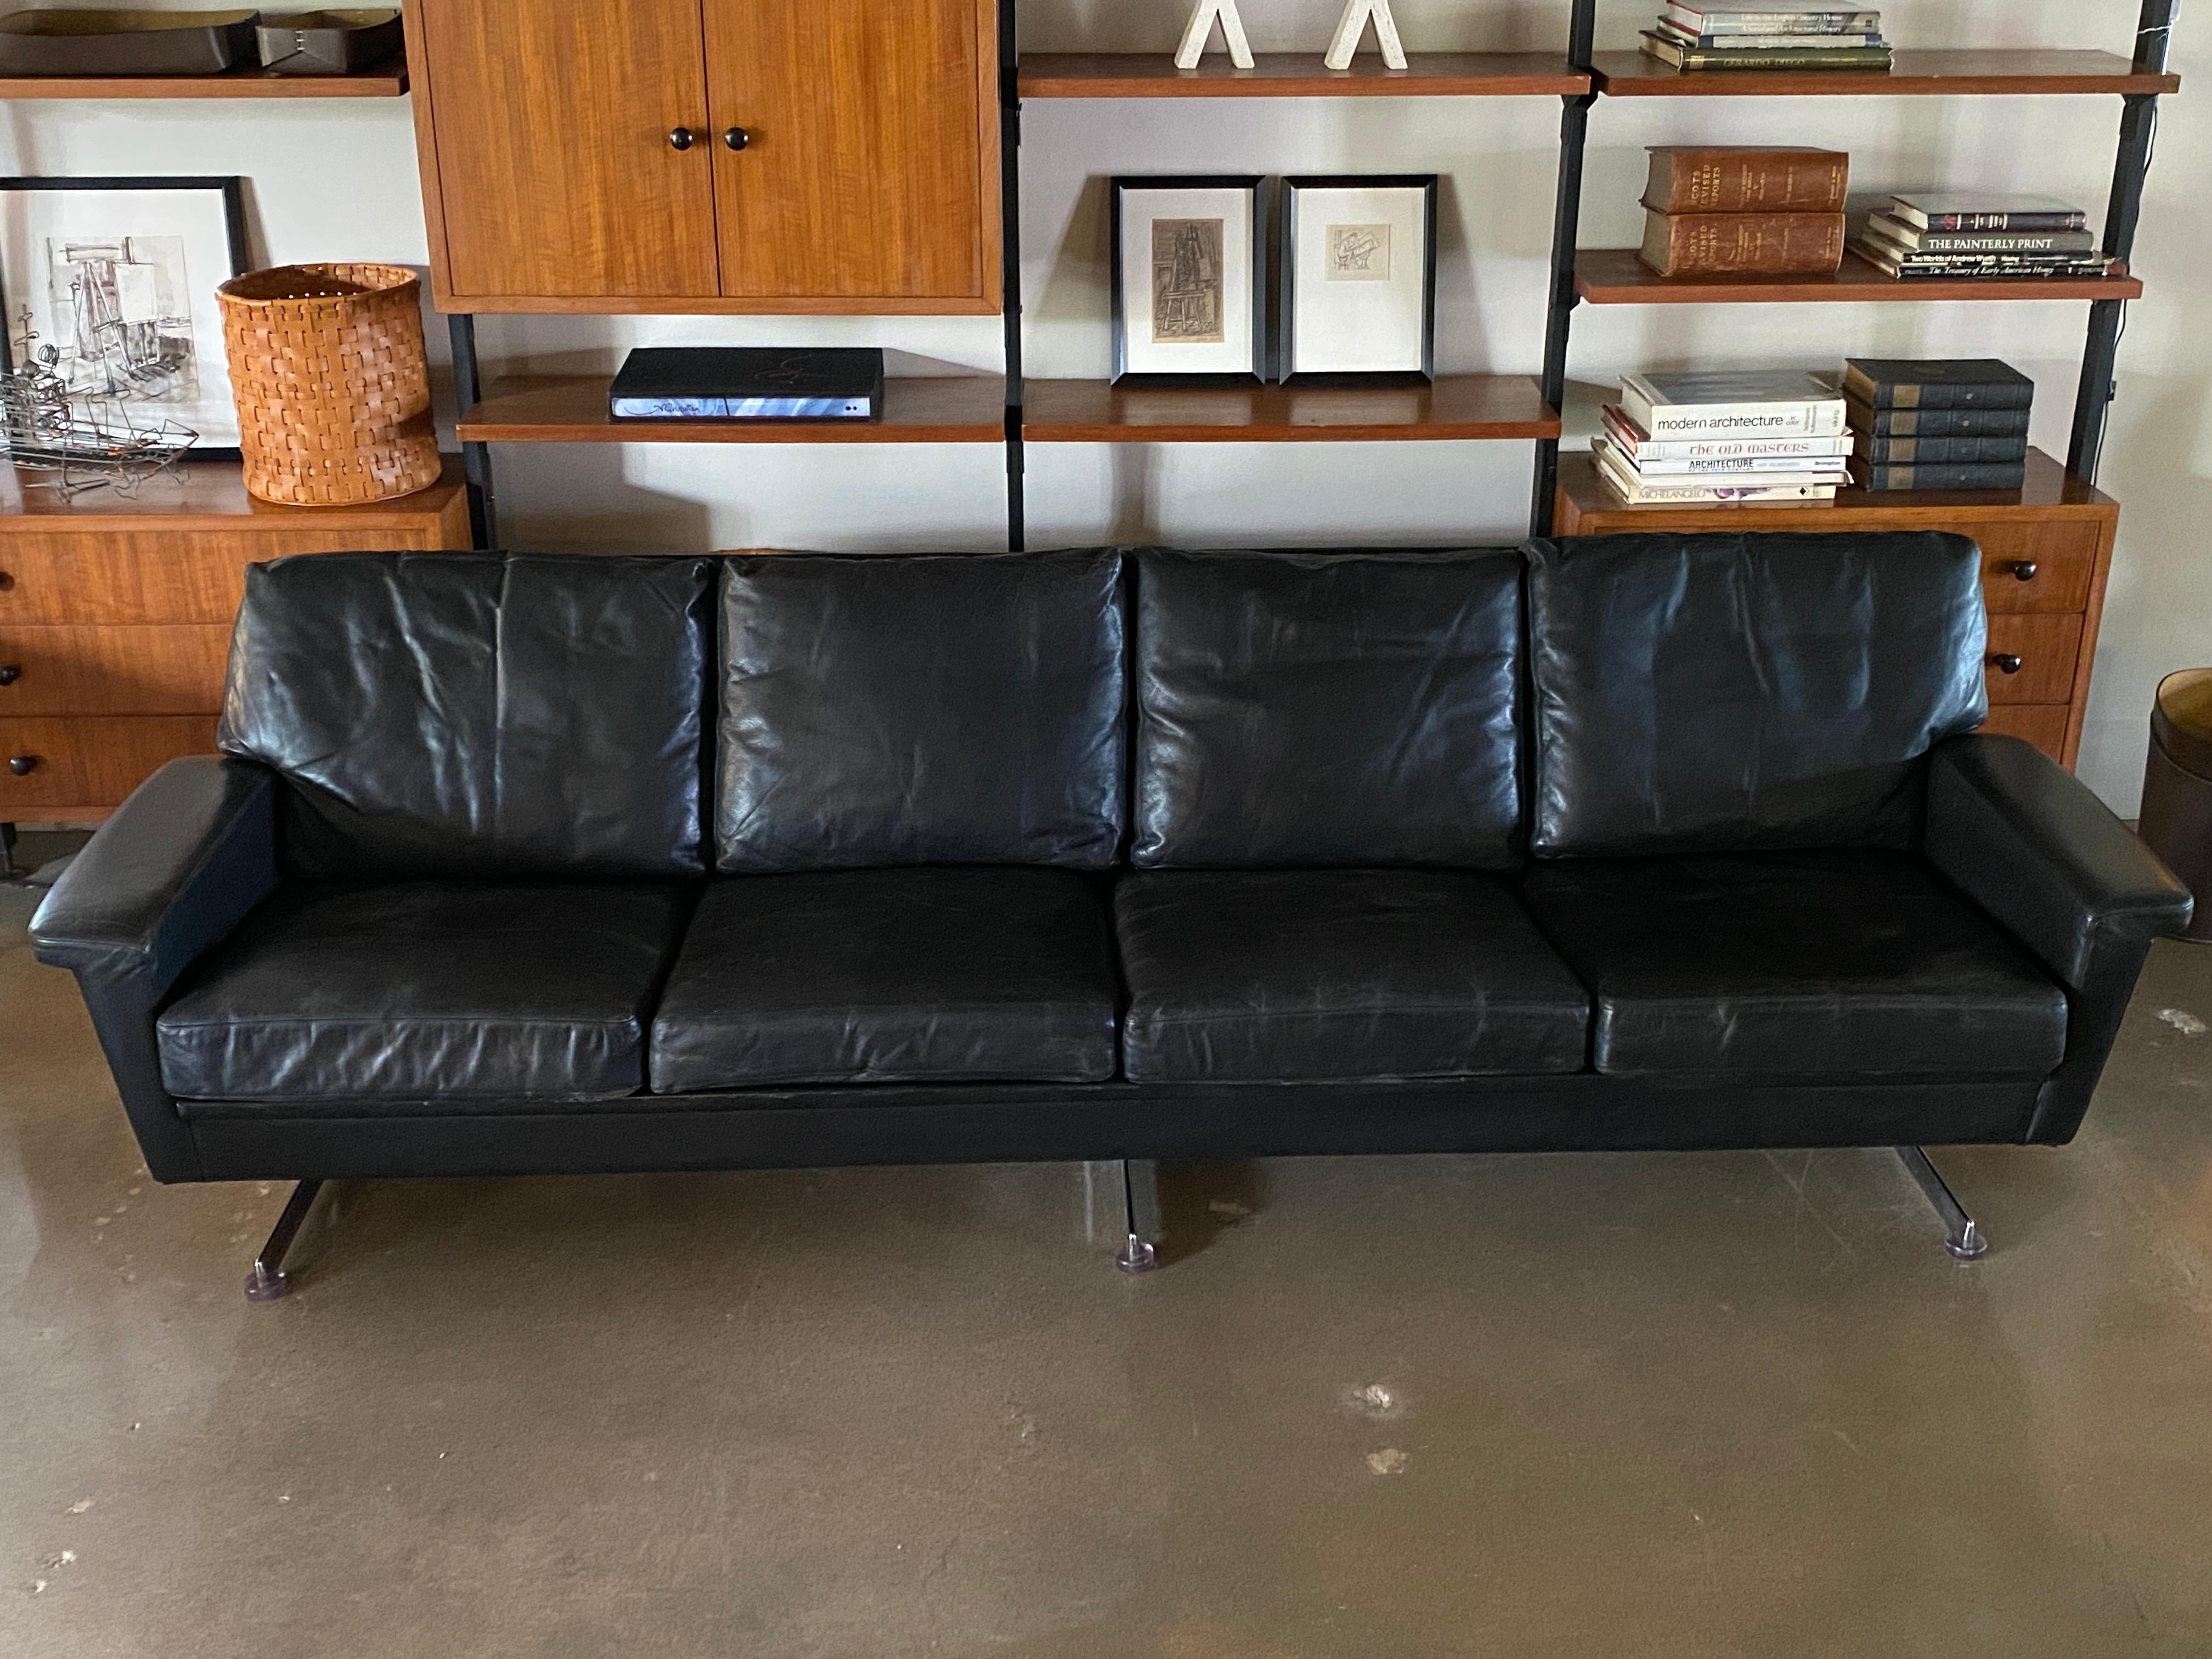 Well styled four cushion sofa with chrome legged base, typical of Italian furniture from the 1950s and 1960s. Chrome legs have acrylic feet. Black leather is in beautiful condition with just the right amount of patina. A very comfortable sofa with